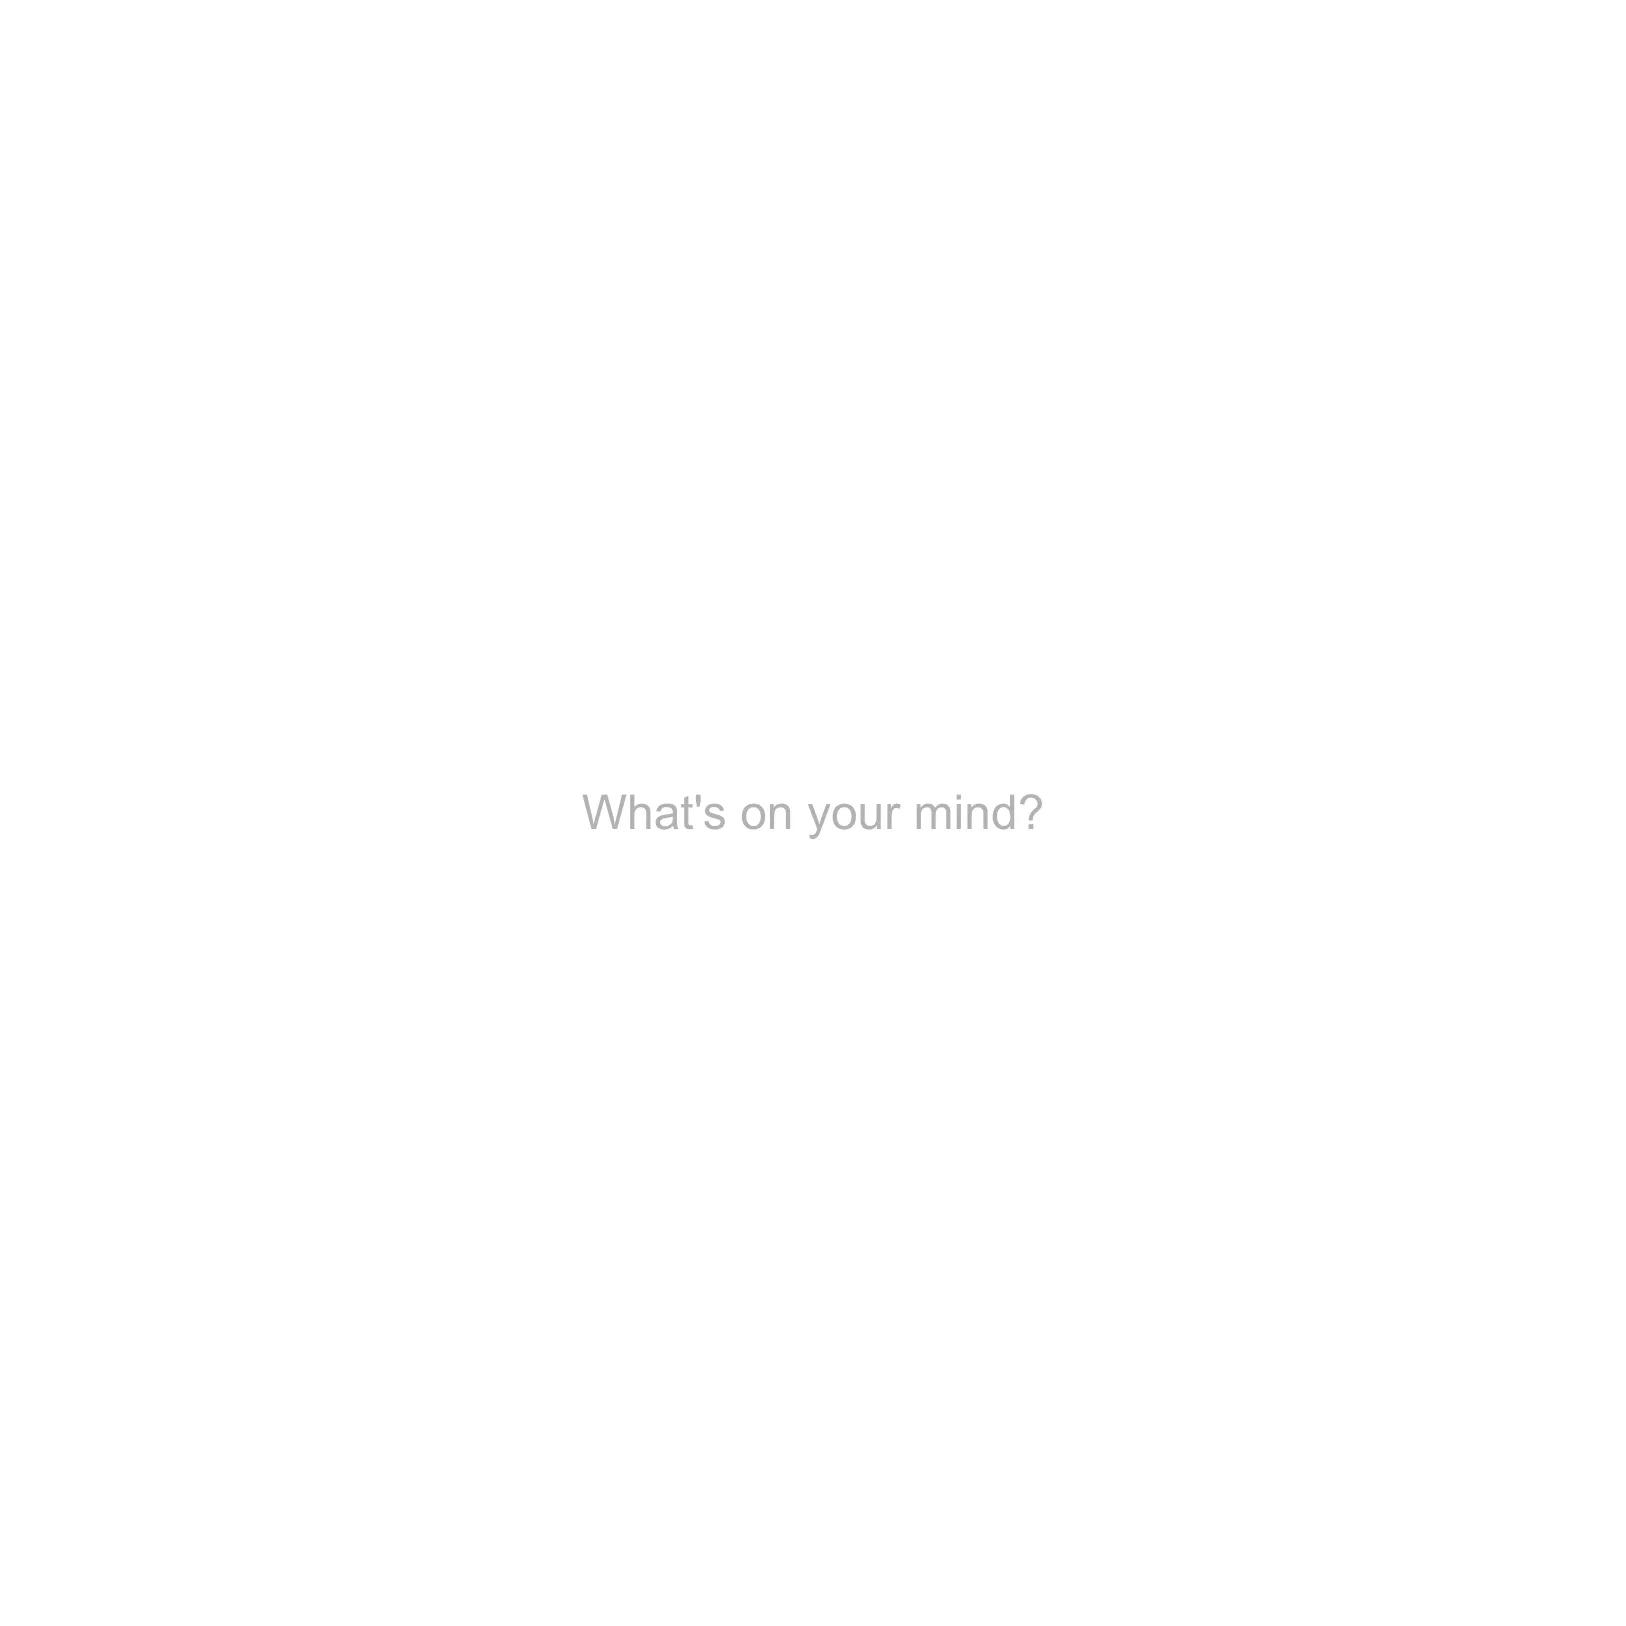 square white image with the text 'What's on your mind?' in the center